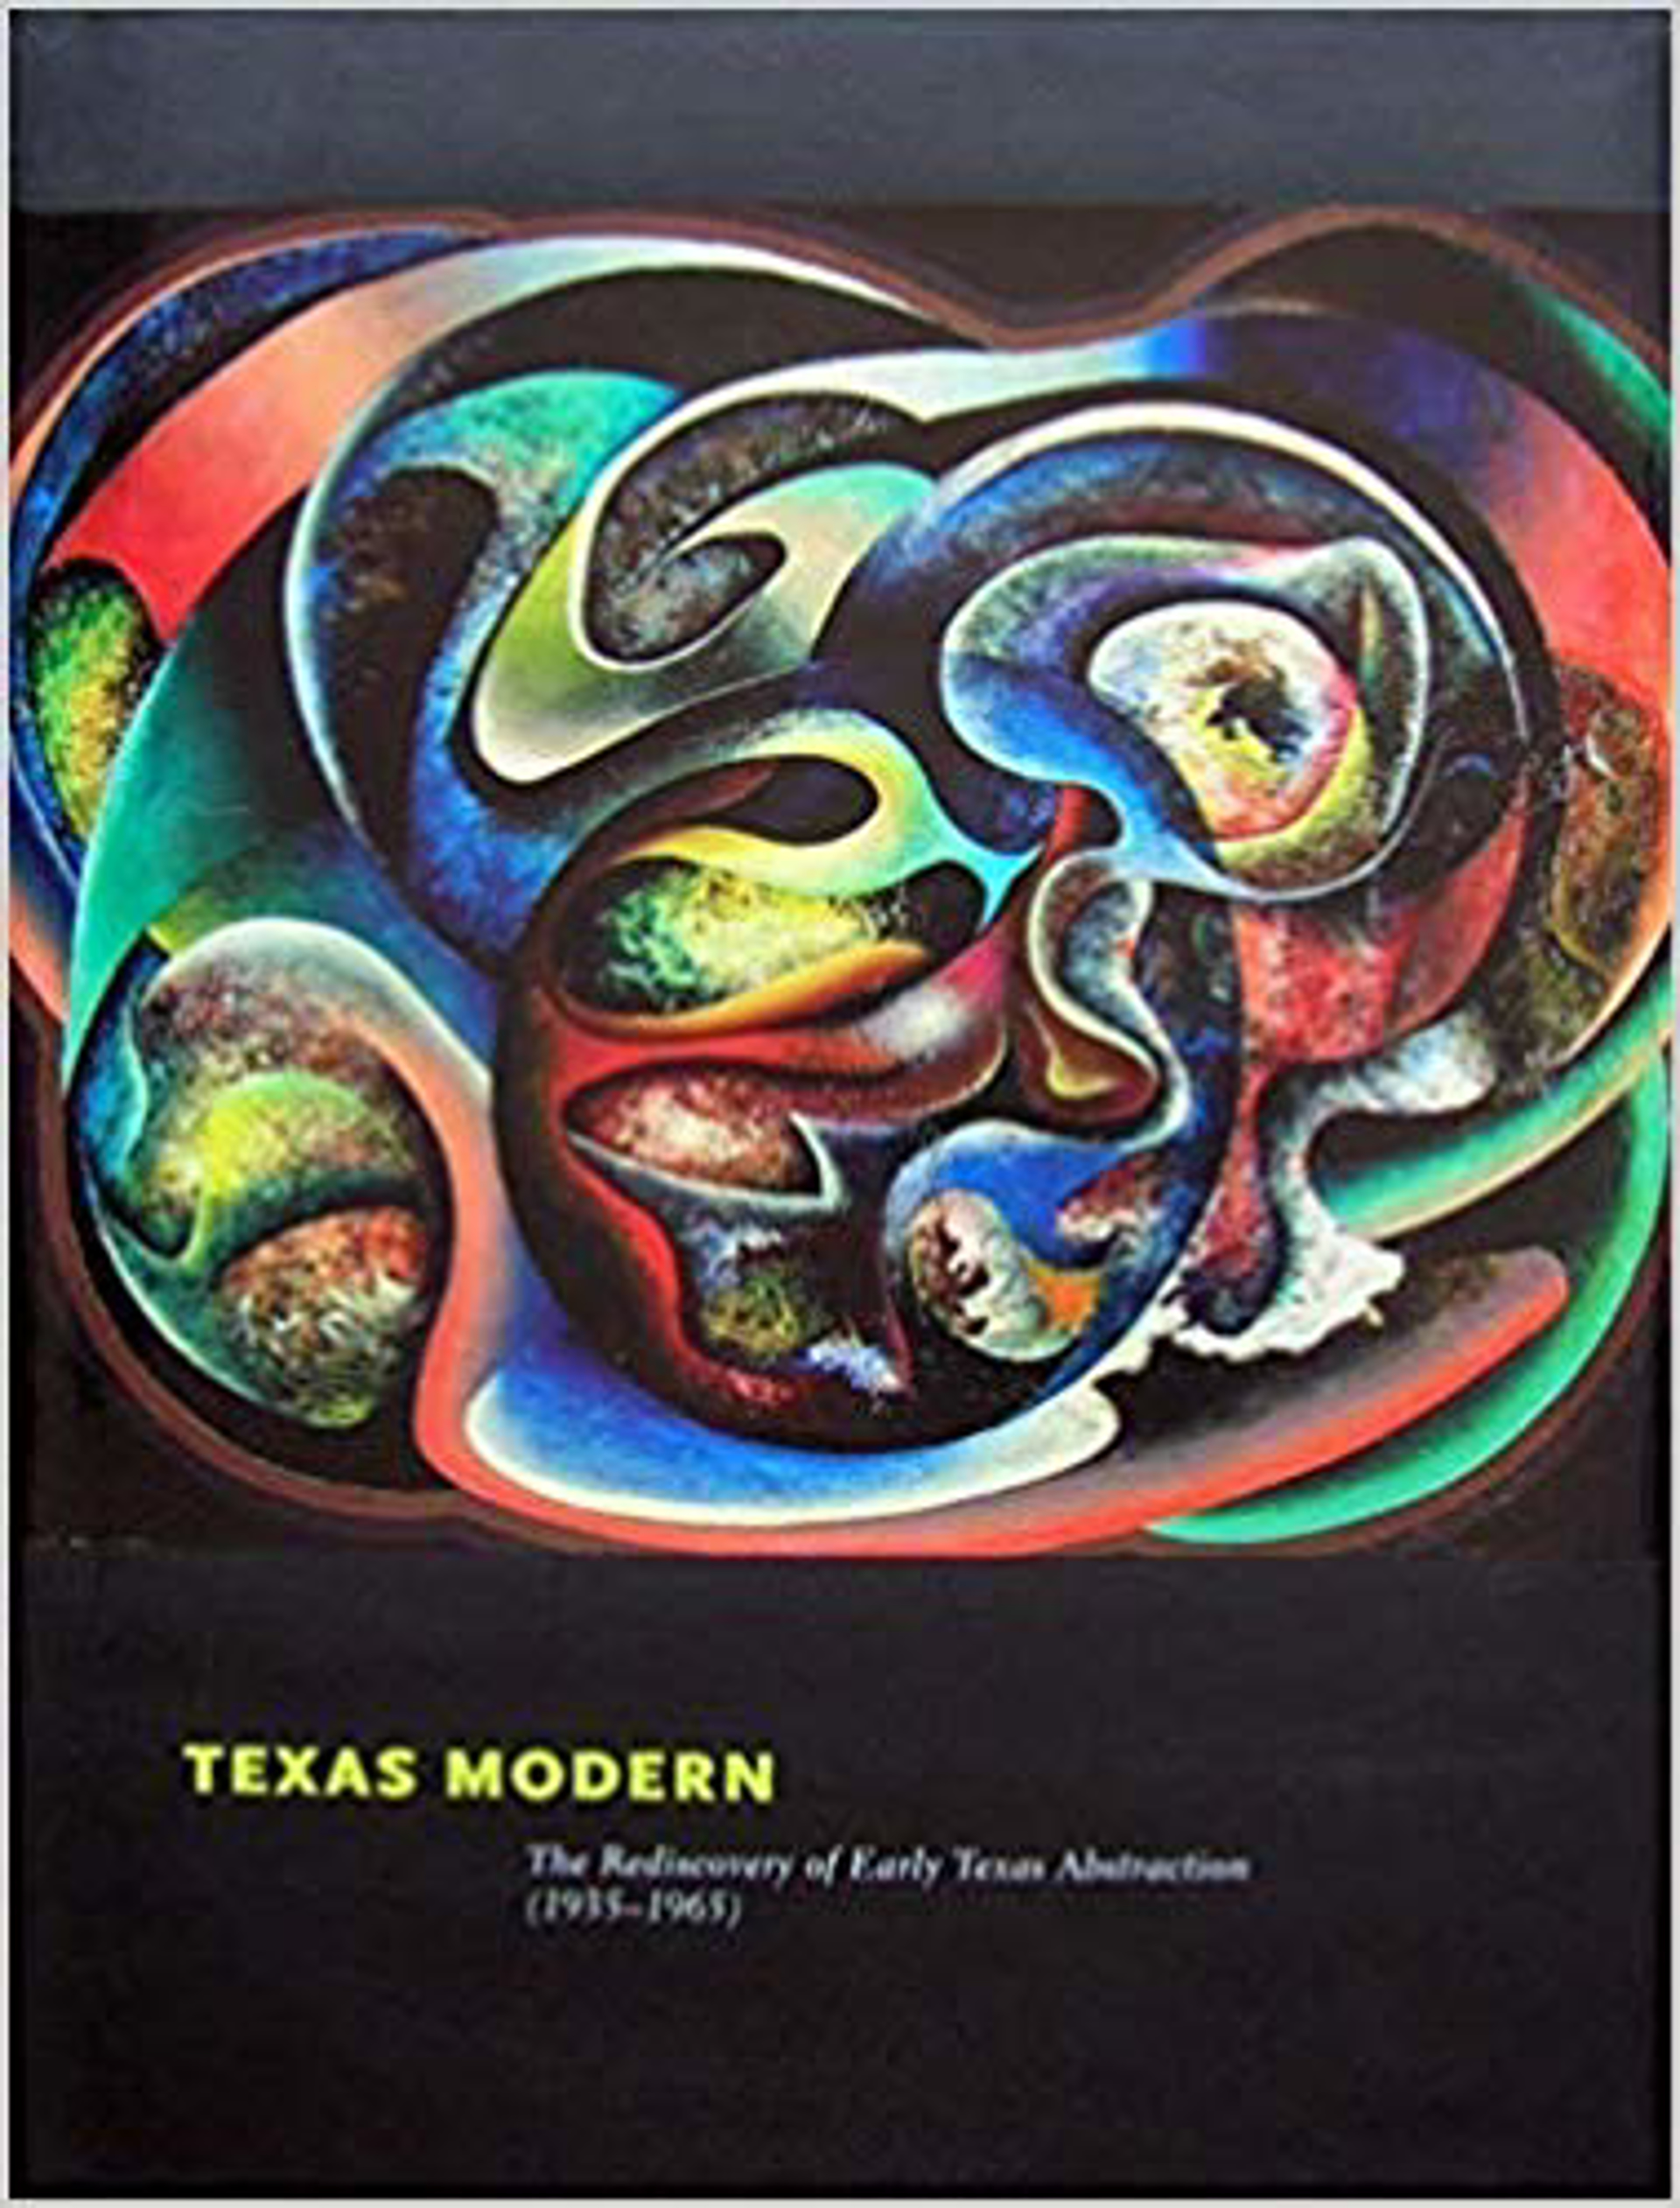 Texas Modern | The Rediscovery of Early Texas Abstraction (1935-1965) by Publications